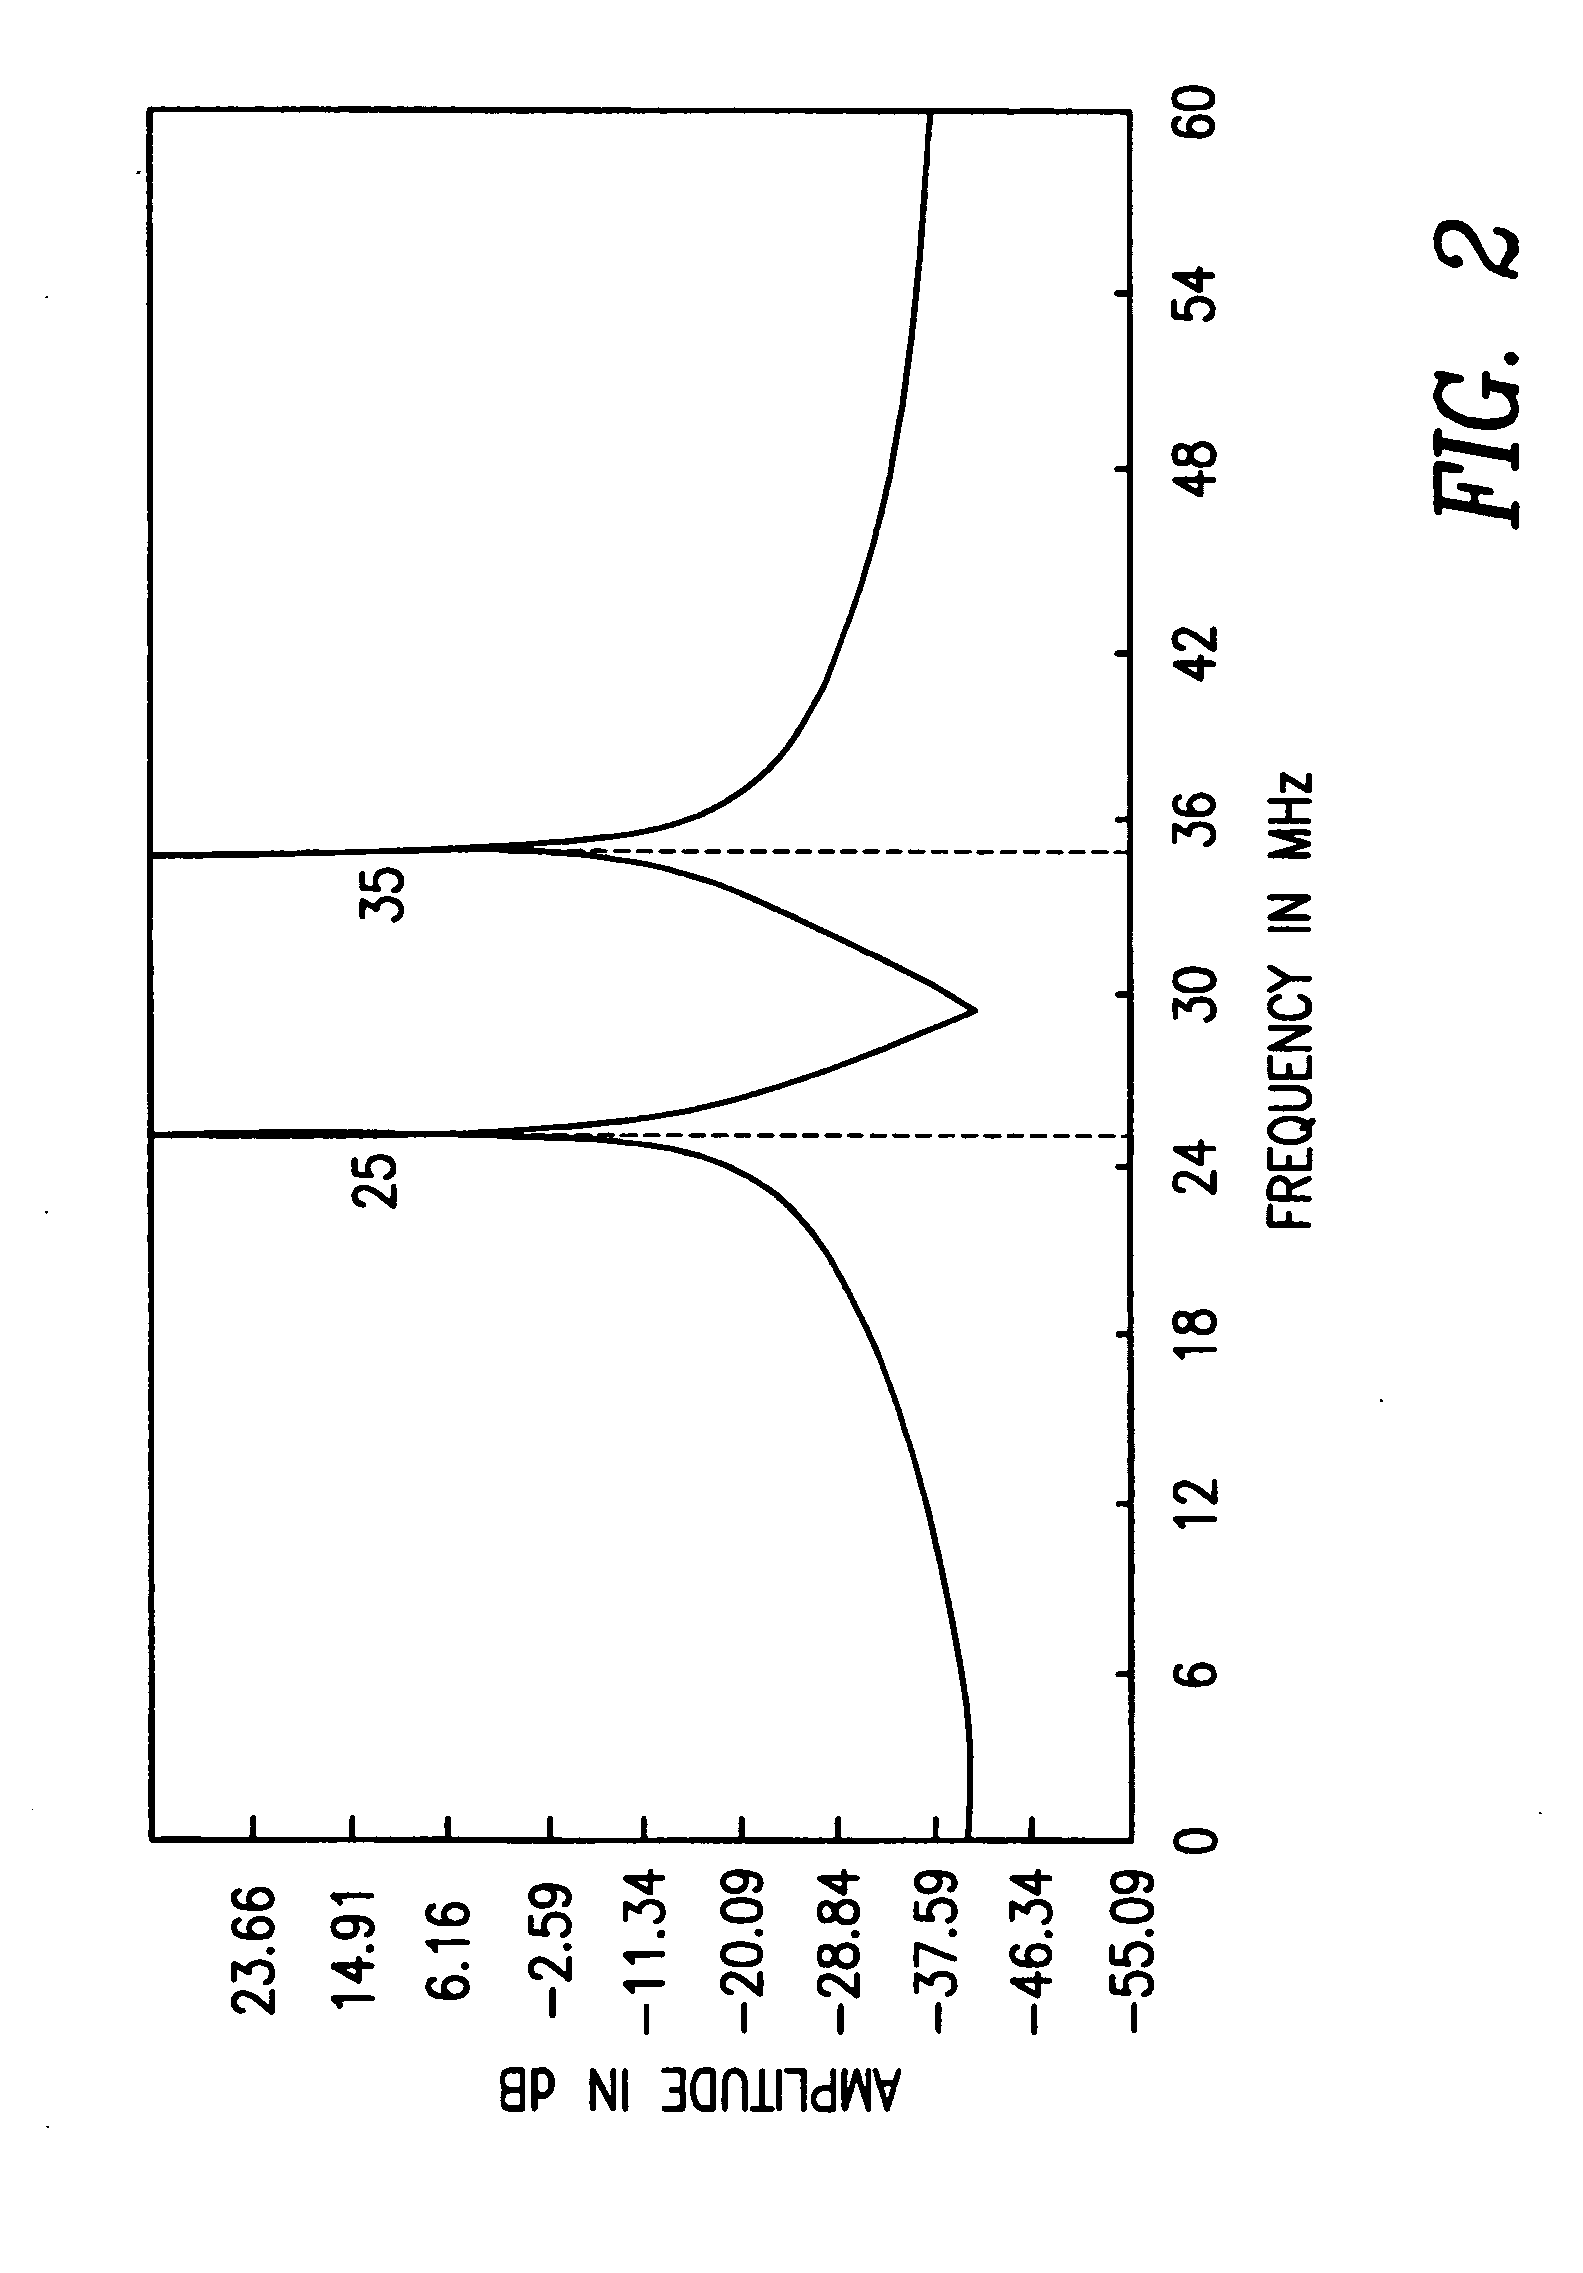 Method and apparatus for feed forward linearization of wideband RF amplifiers